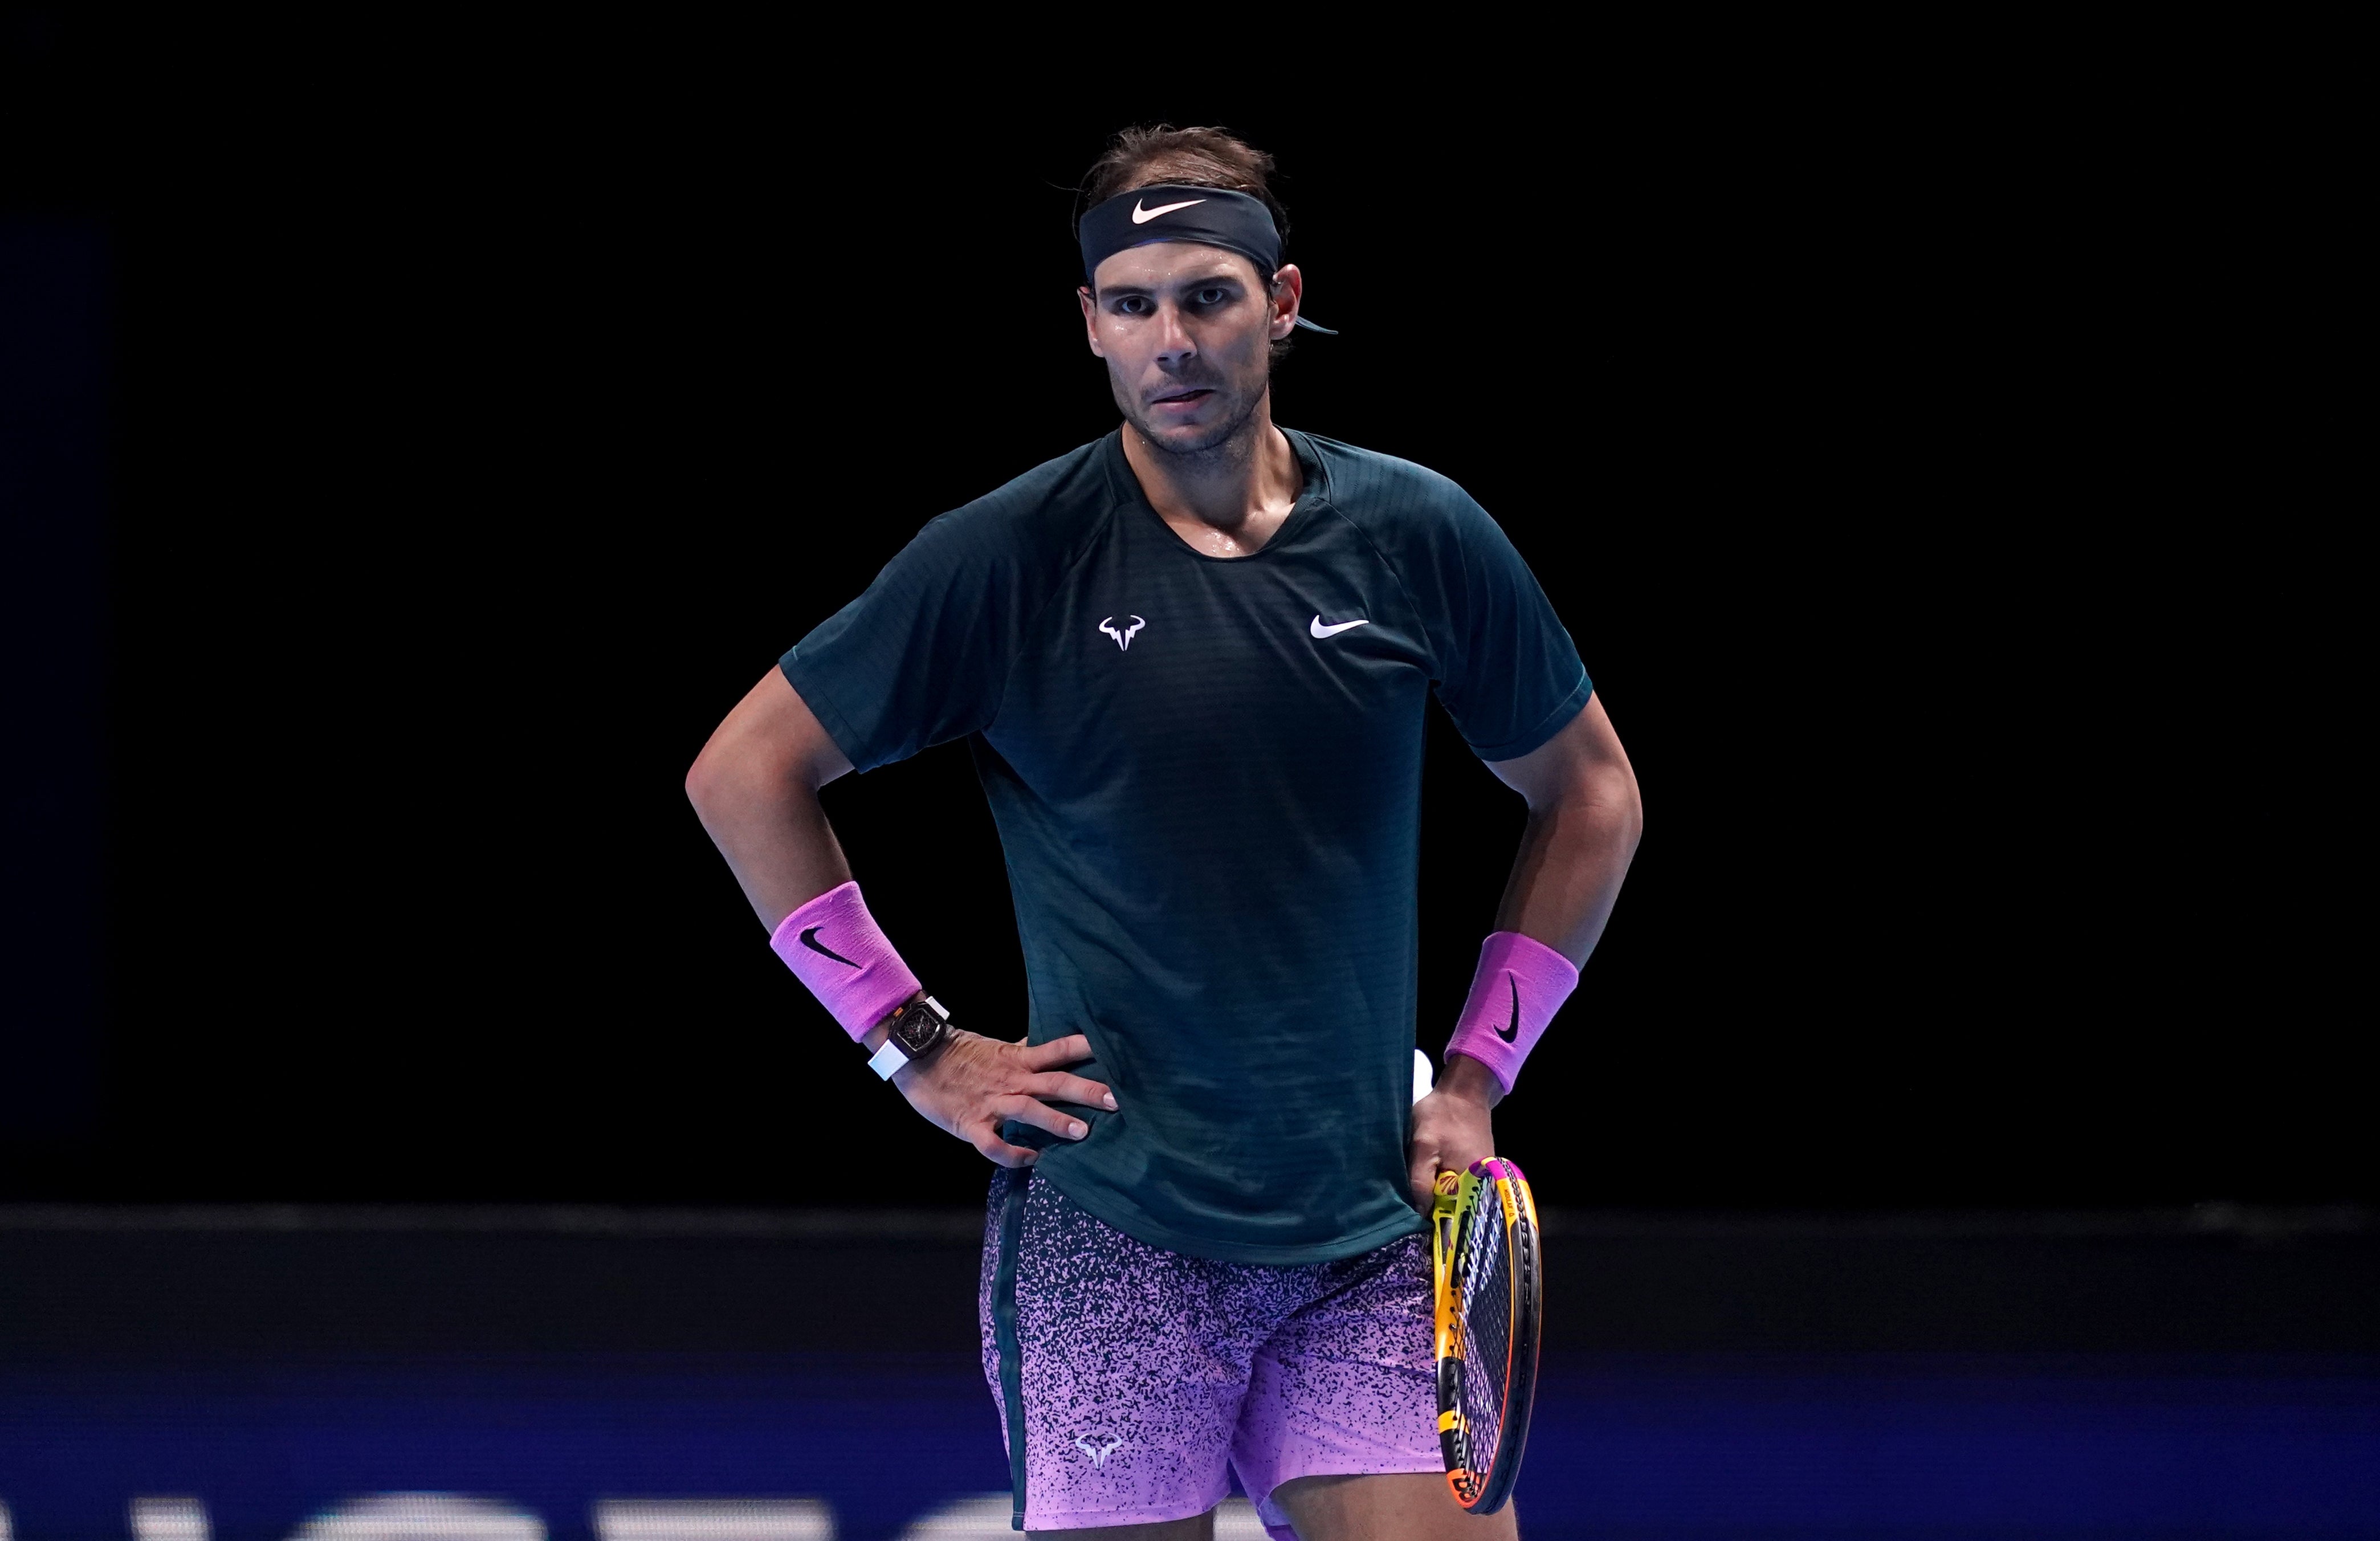 Rafael Nadal has been struggling with a foot injury for some time